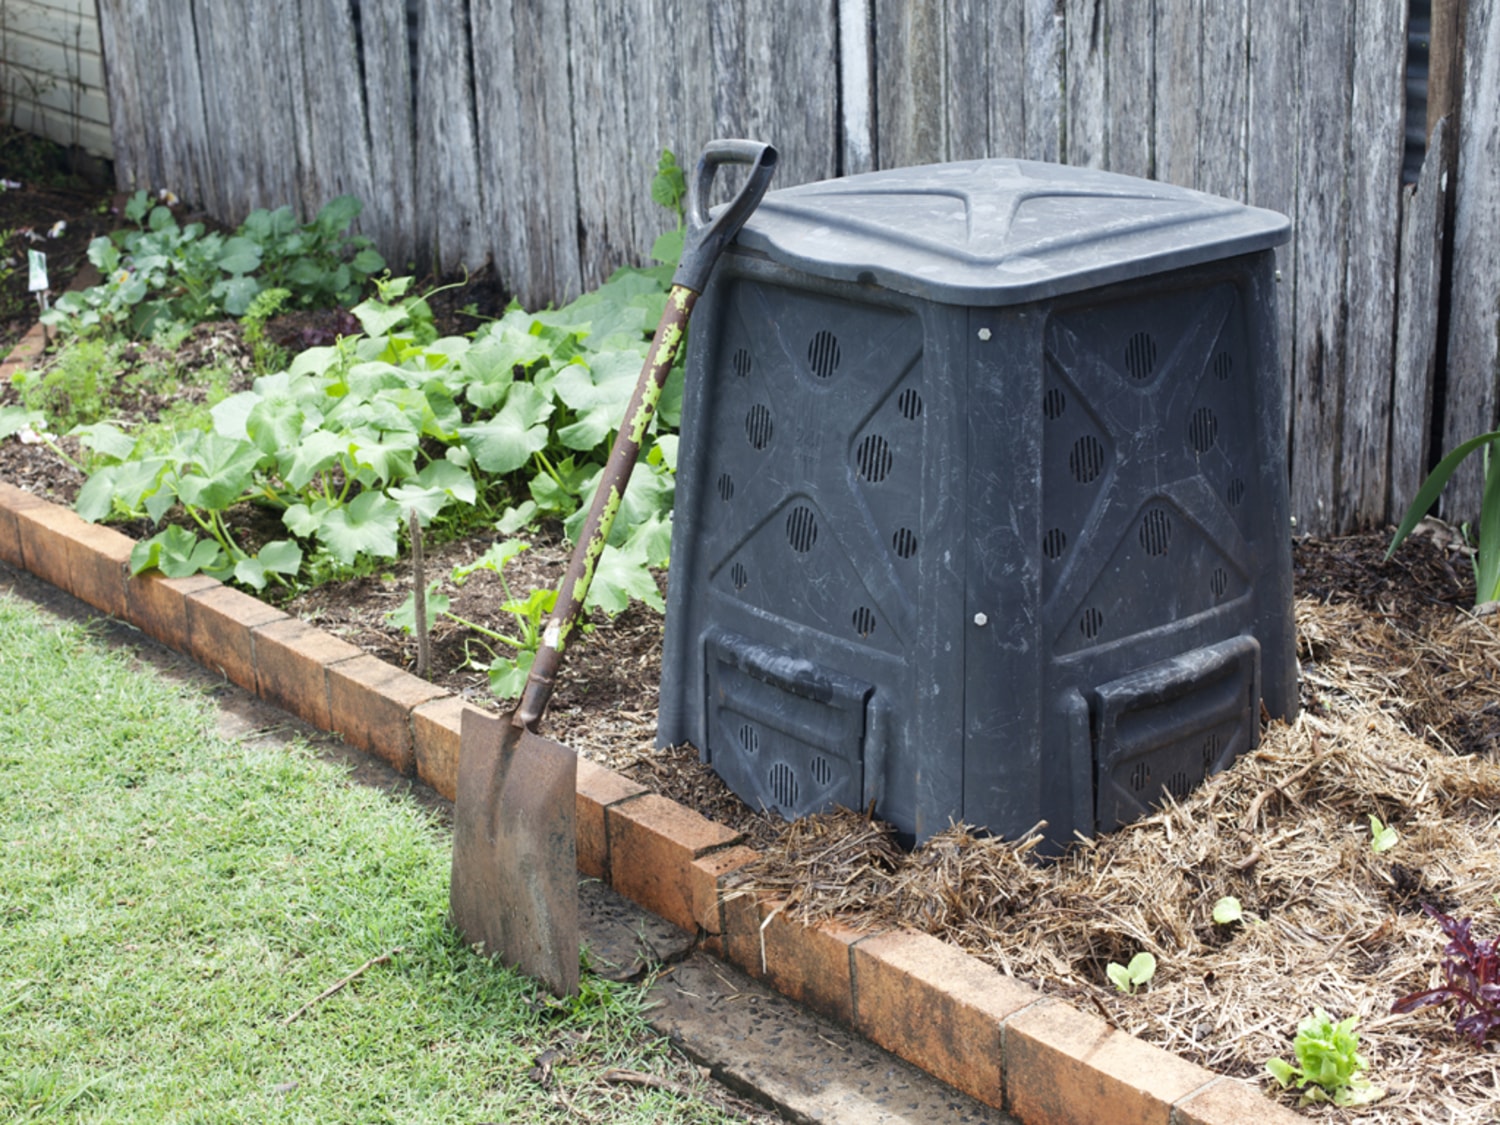 How to Compost: A Guide to Composting at Home